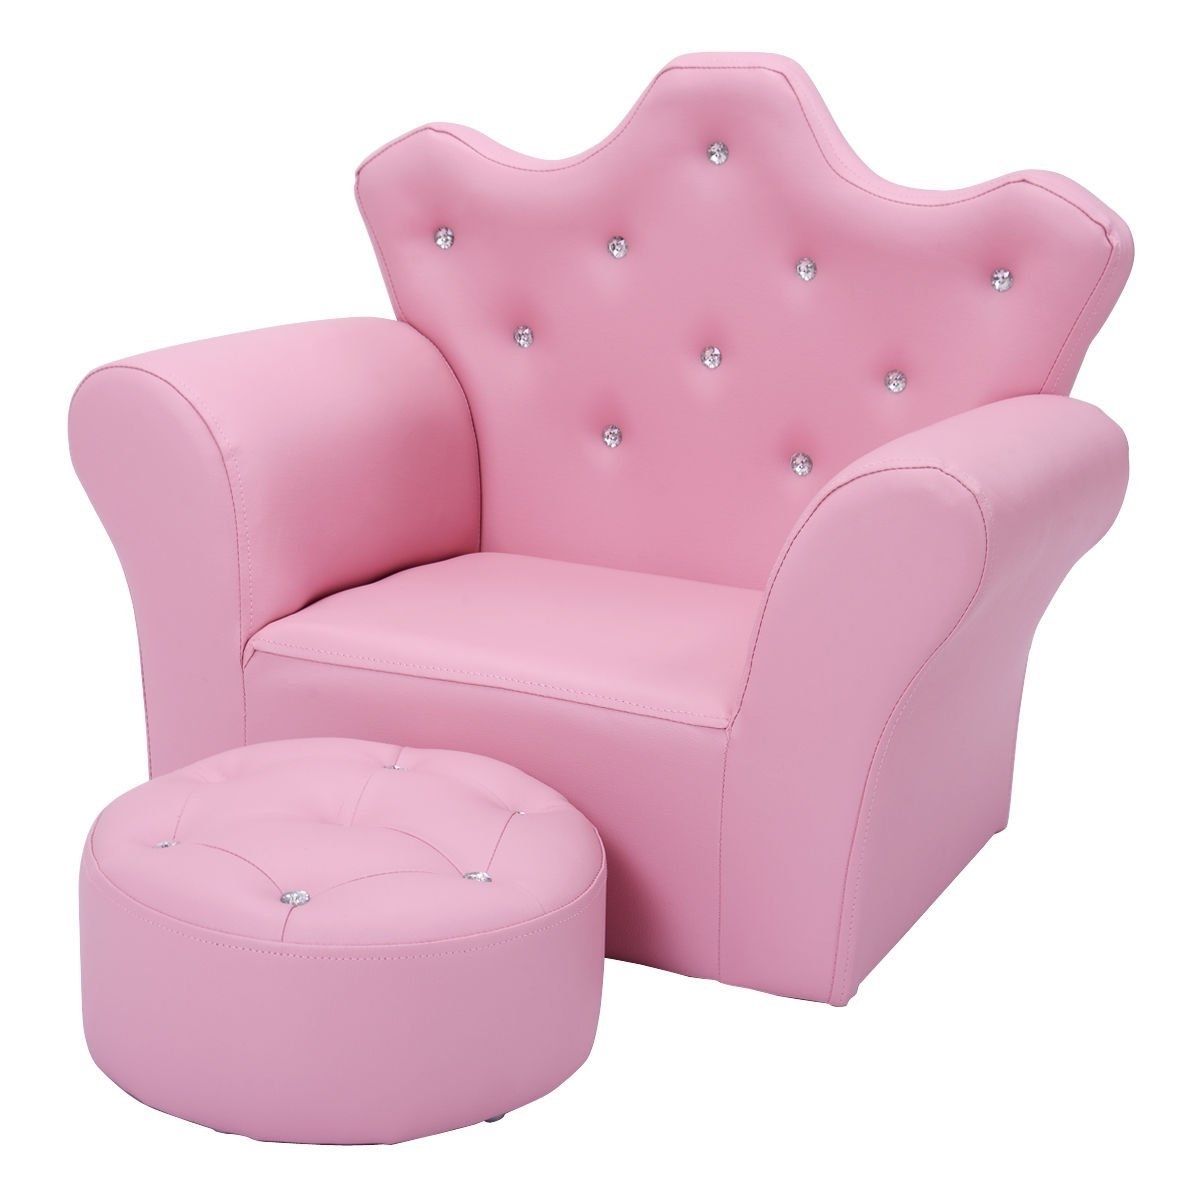 2017 Amazon: Costzon Kids Sofa Chair With Ottoman Children Intended For Personalized Kids Chairs And Sofas (View 4 of 15)